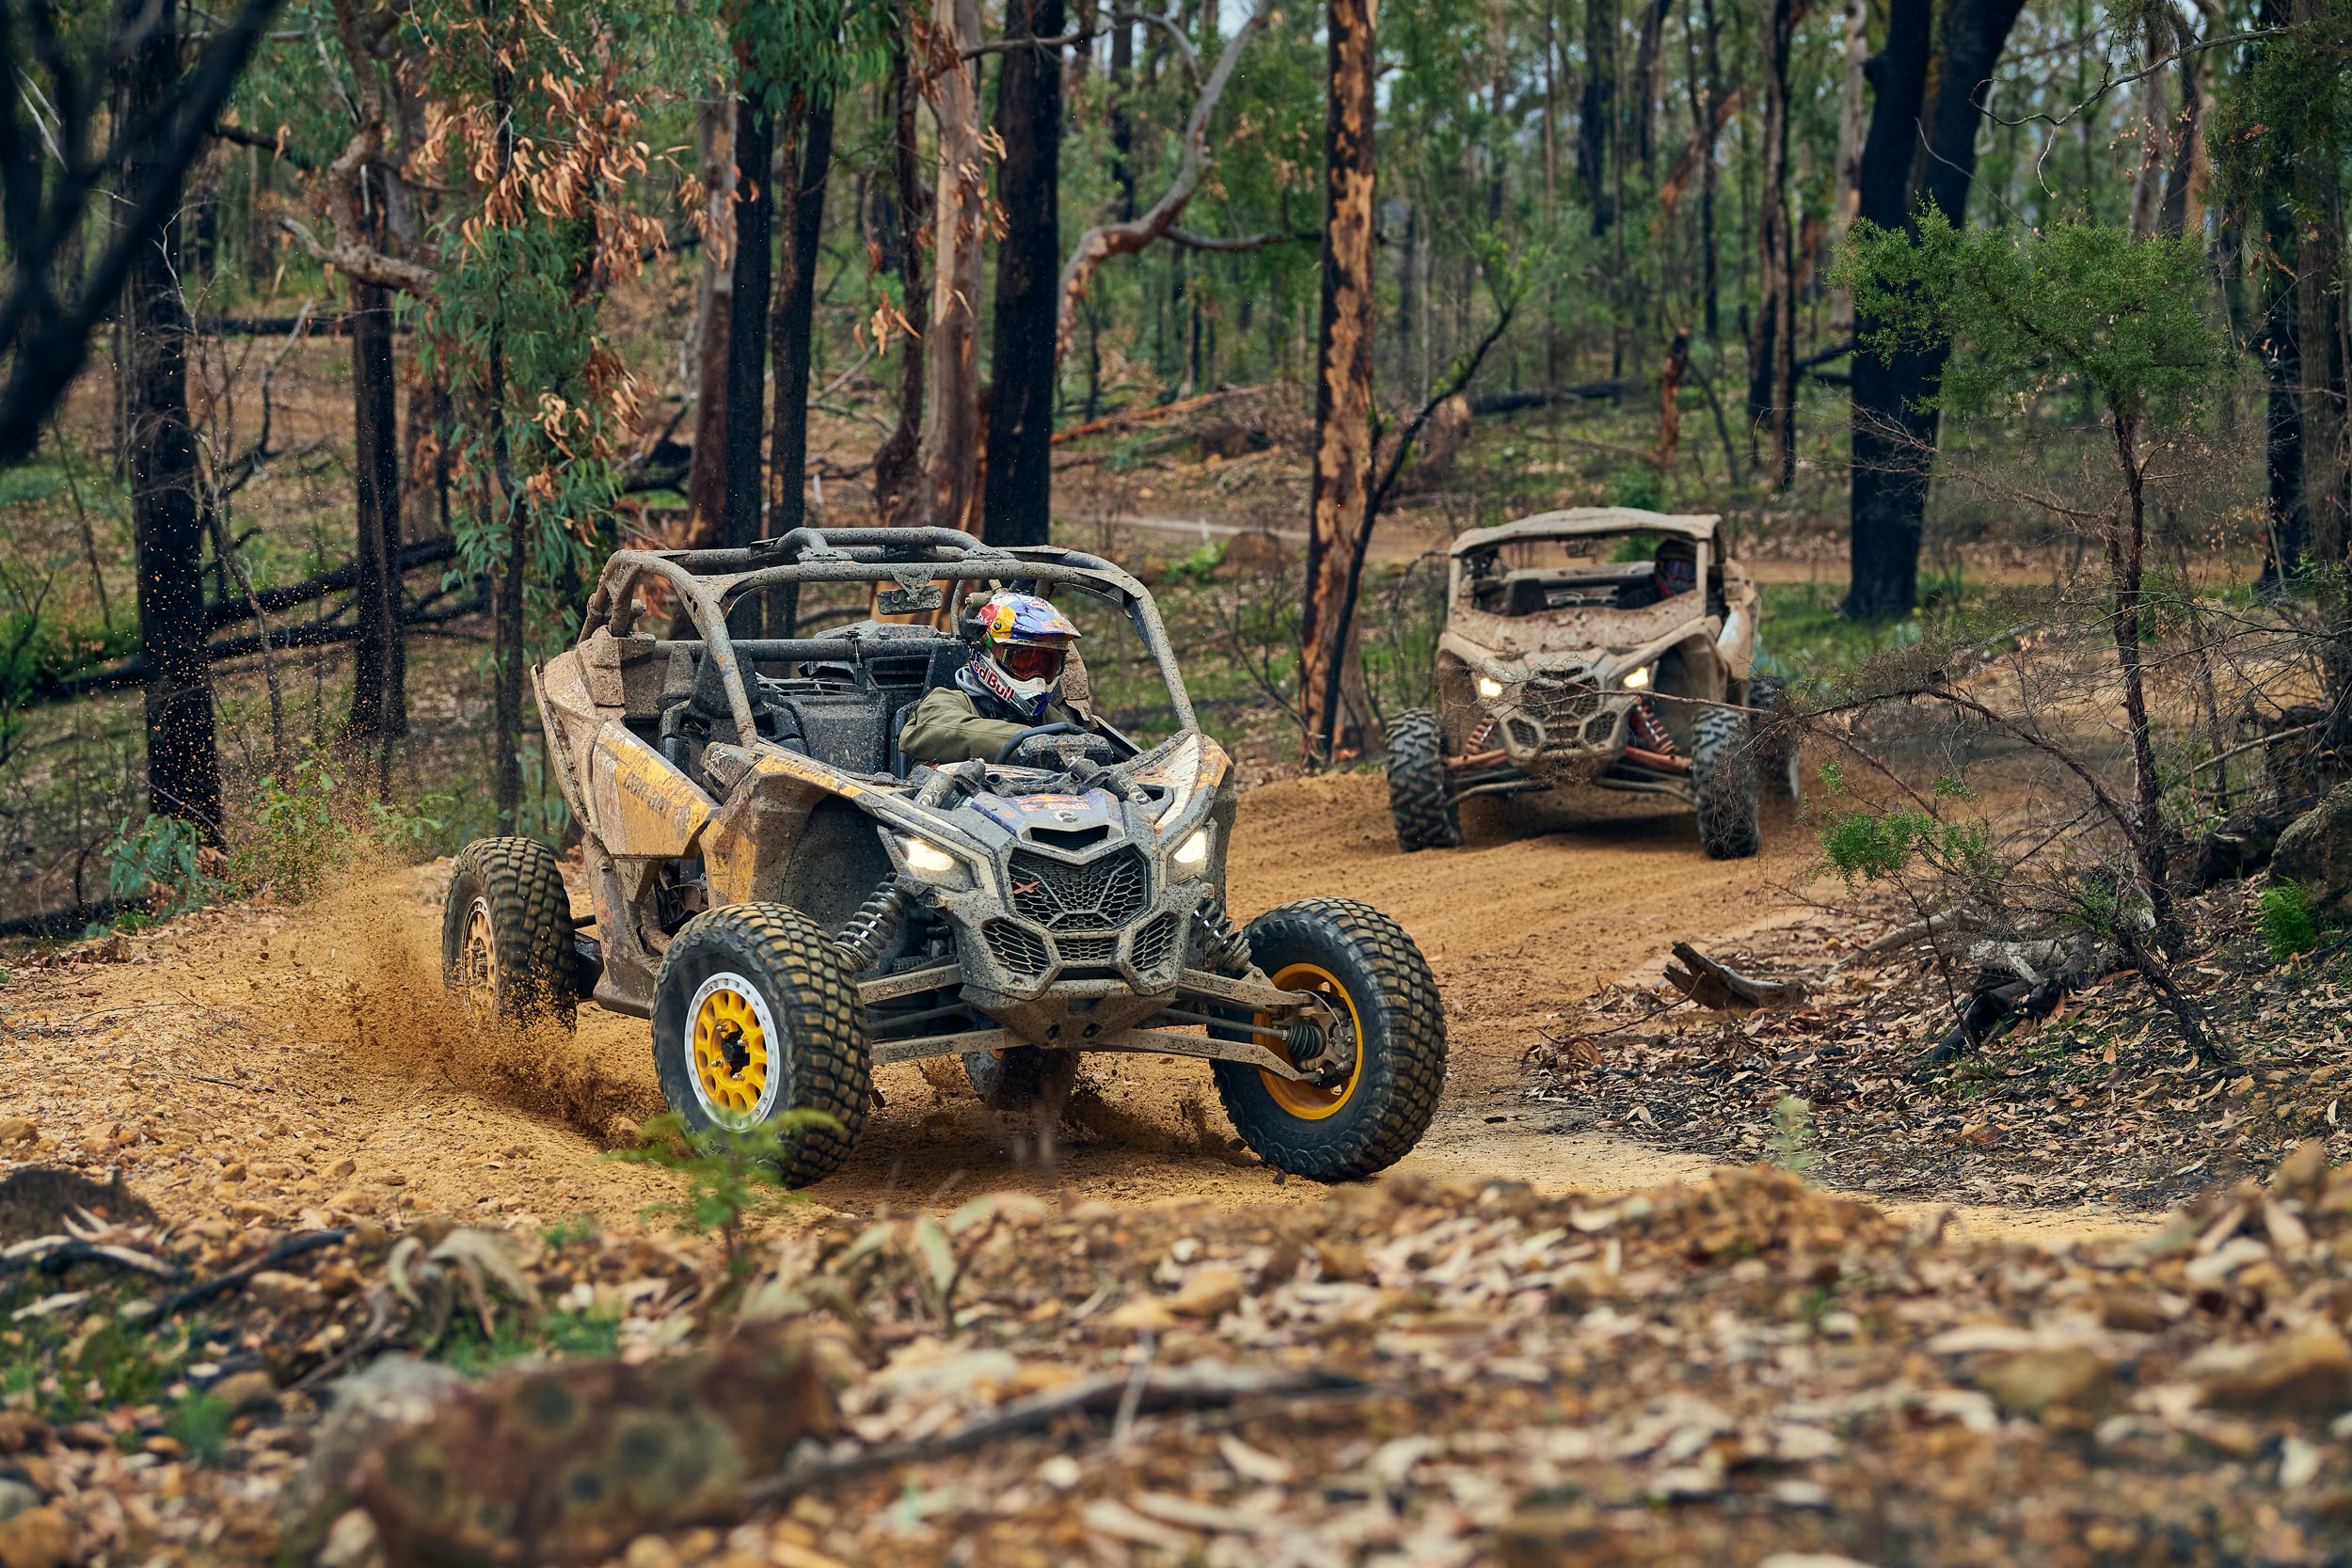 A side-by-side vehicle being driven on a dirt trail